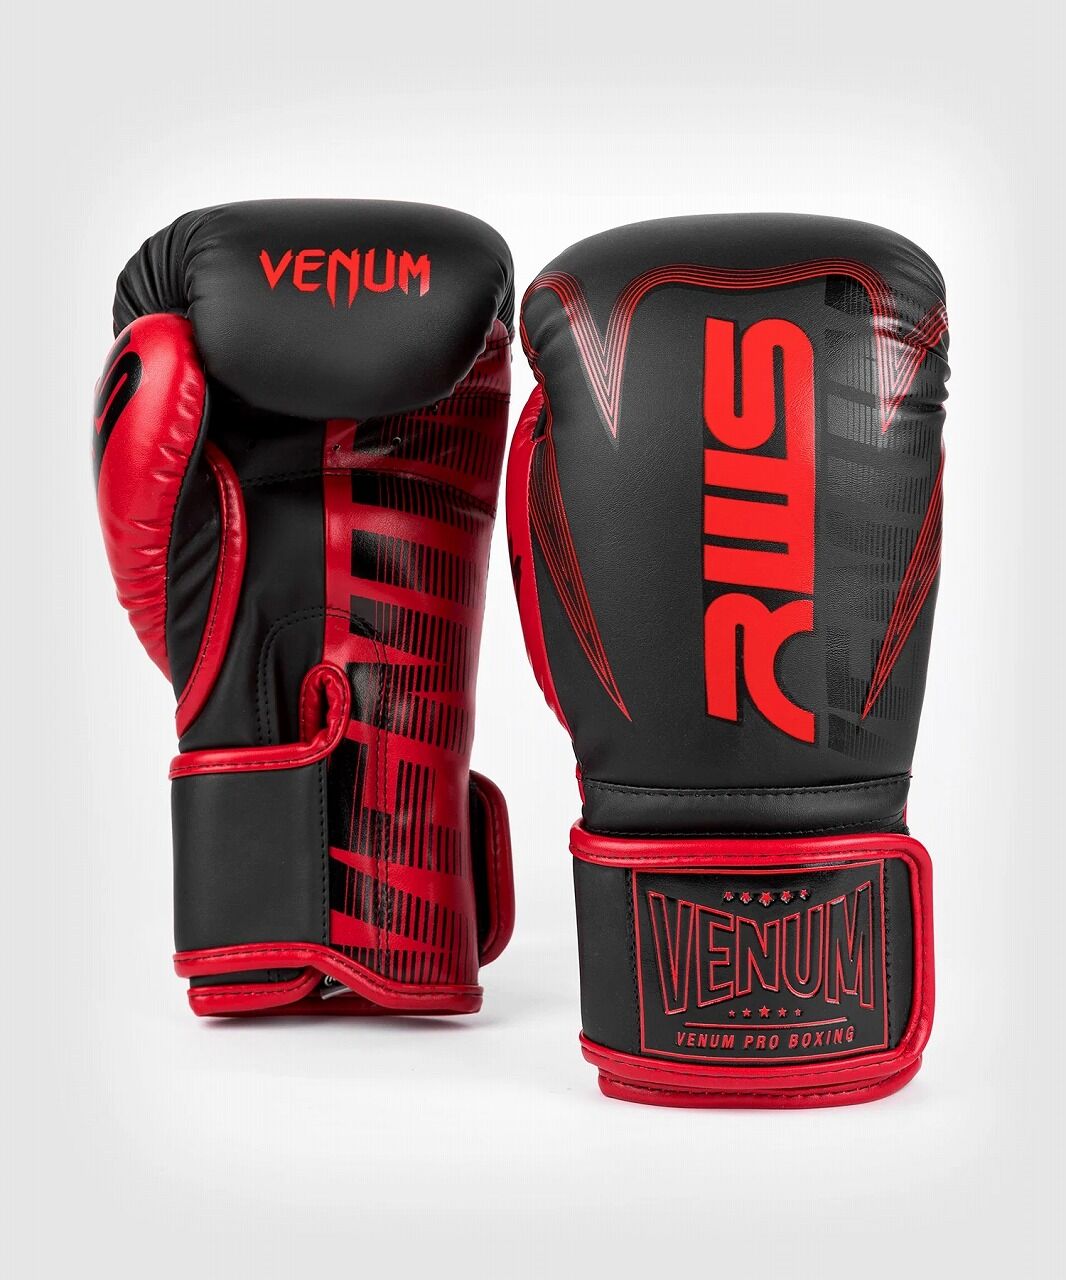 VENUM New Boxing Gloves Available